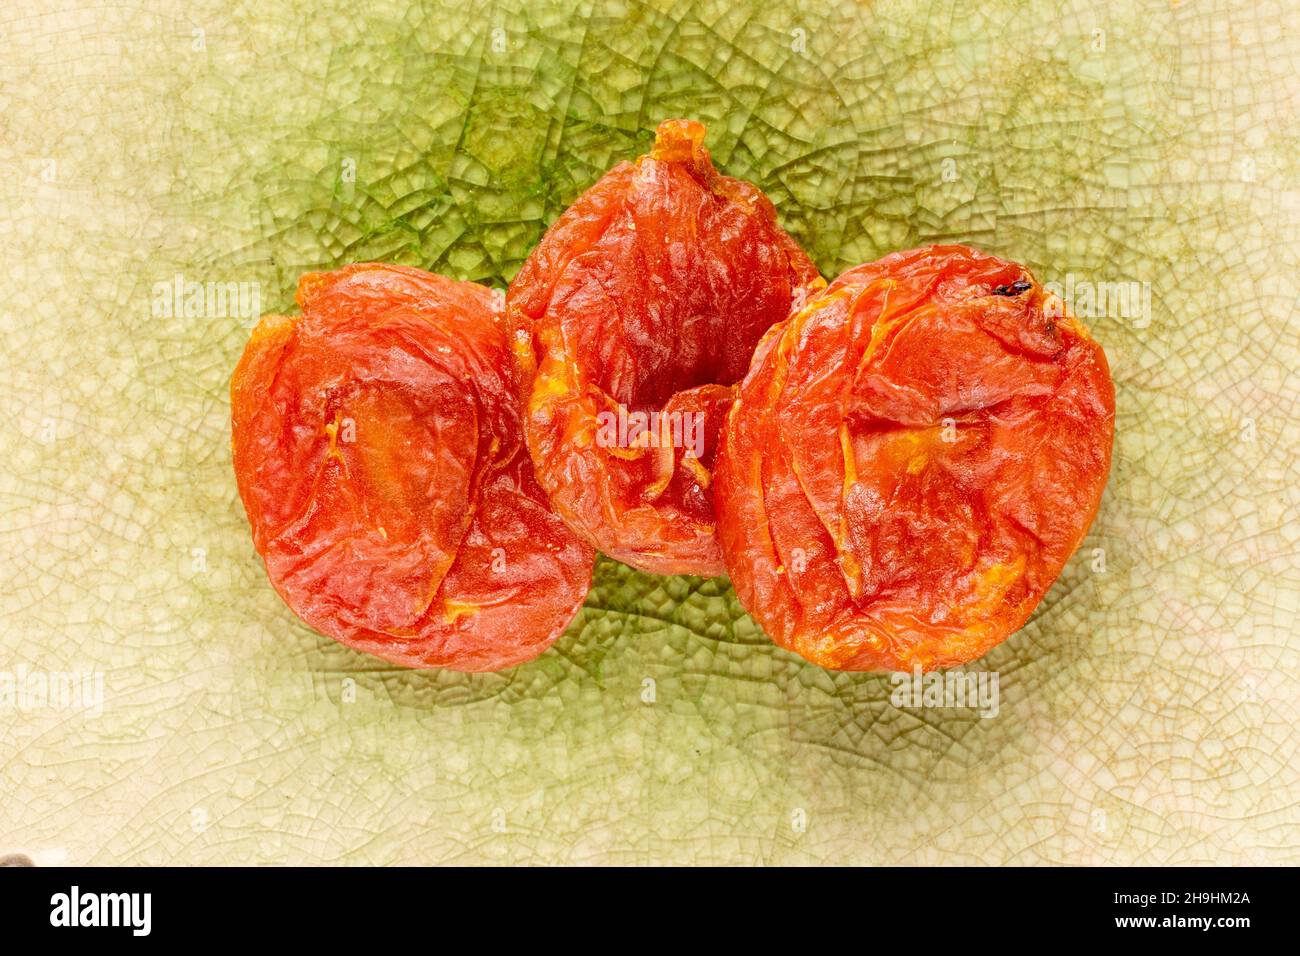 Several sweet dry apricots, close-up on a ceramic dish, top view. Stock Photo